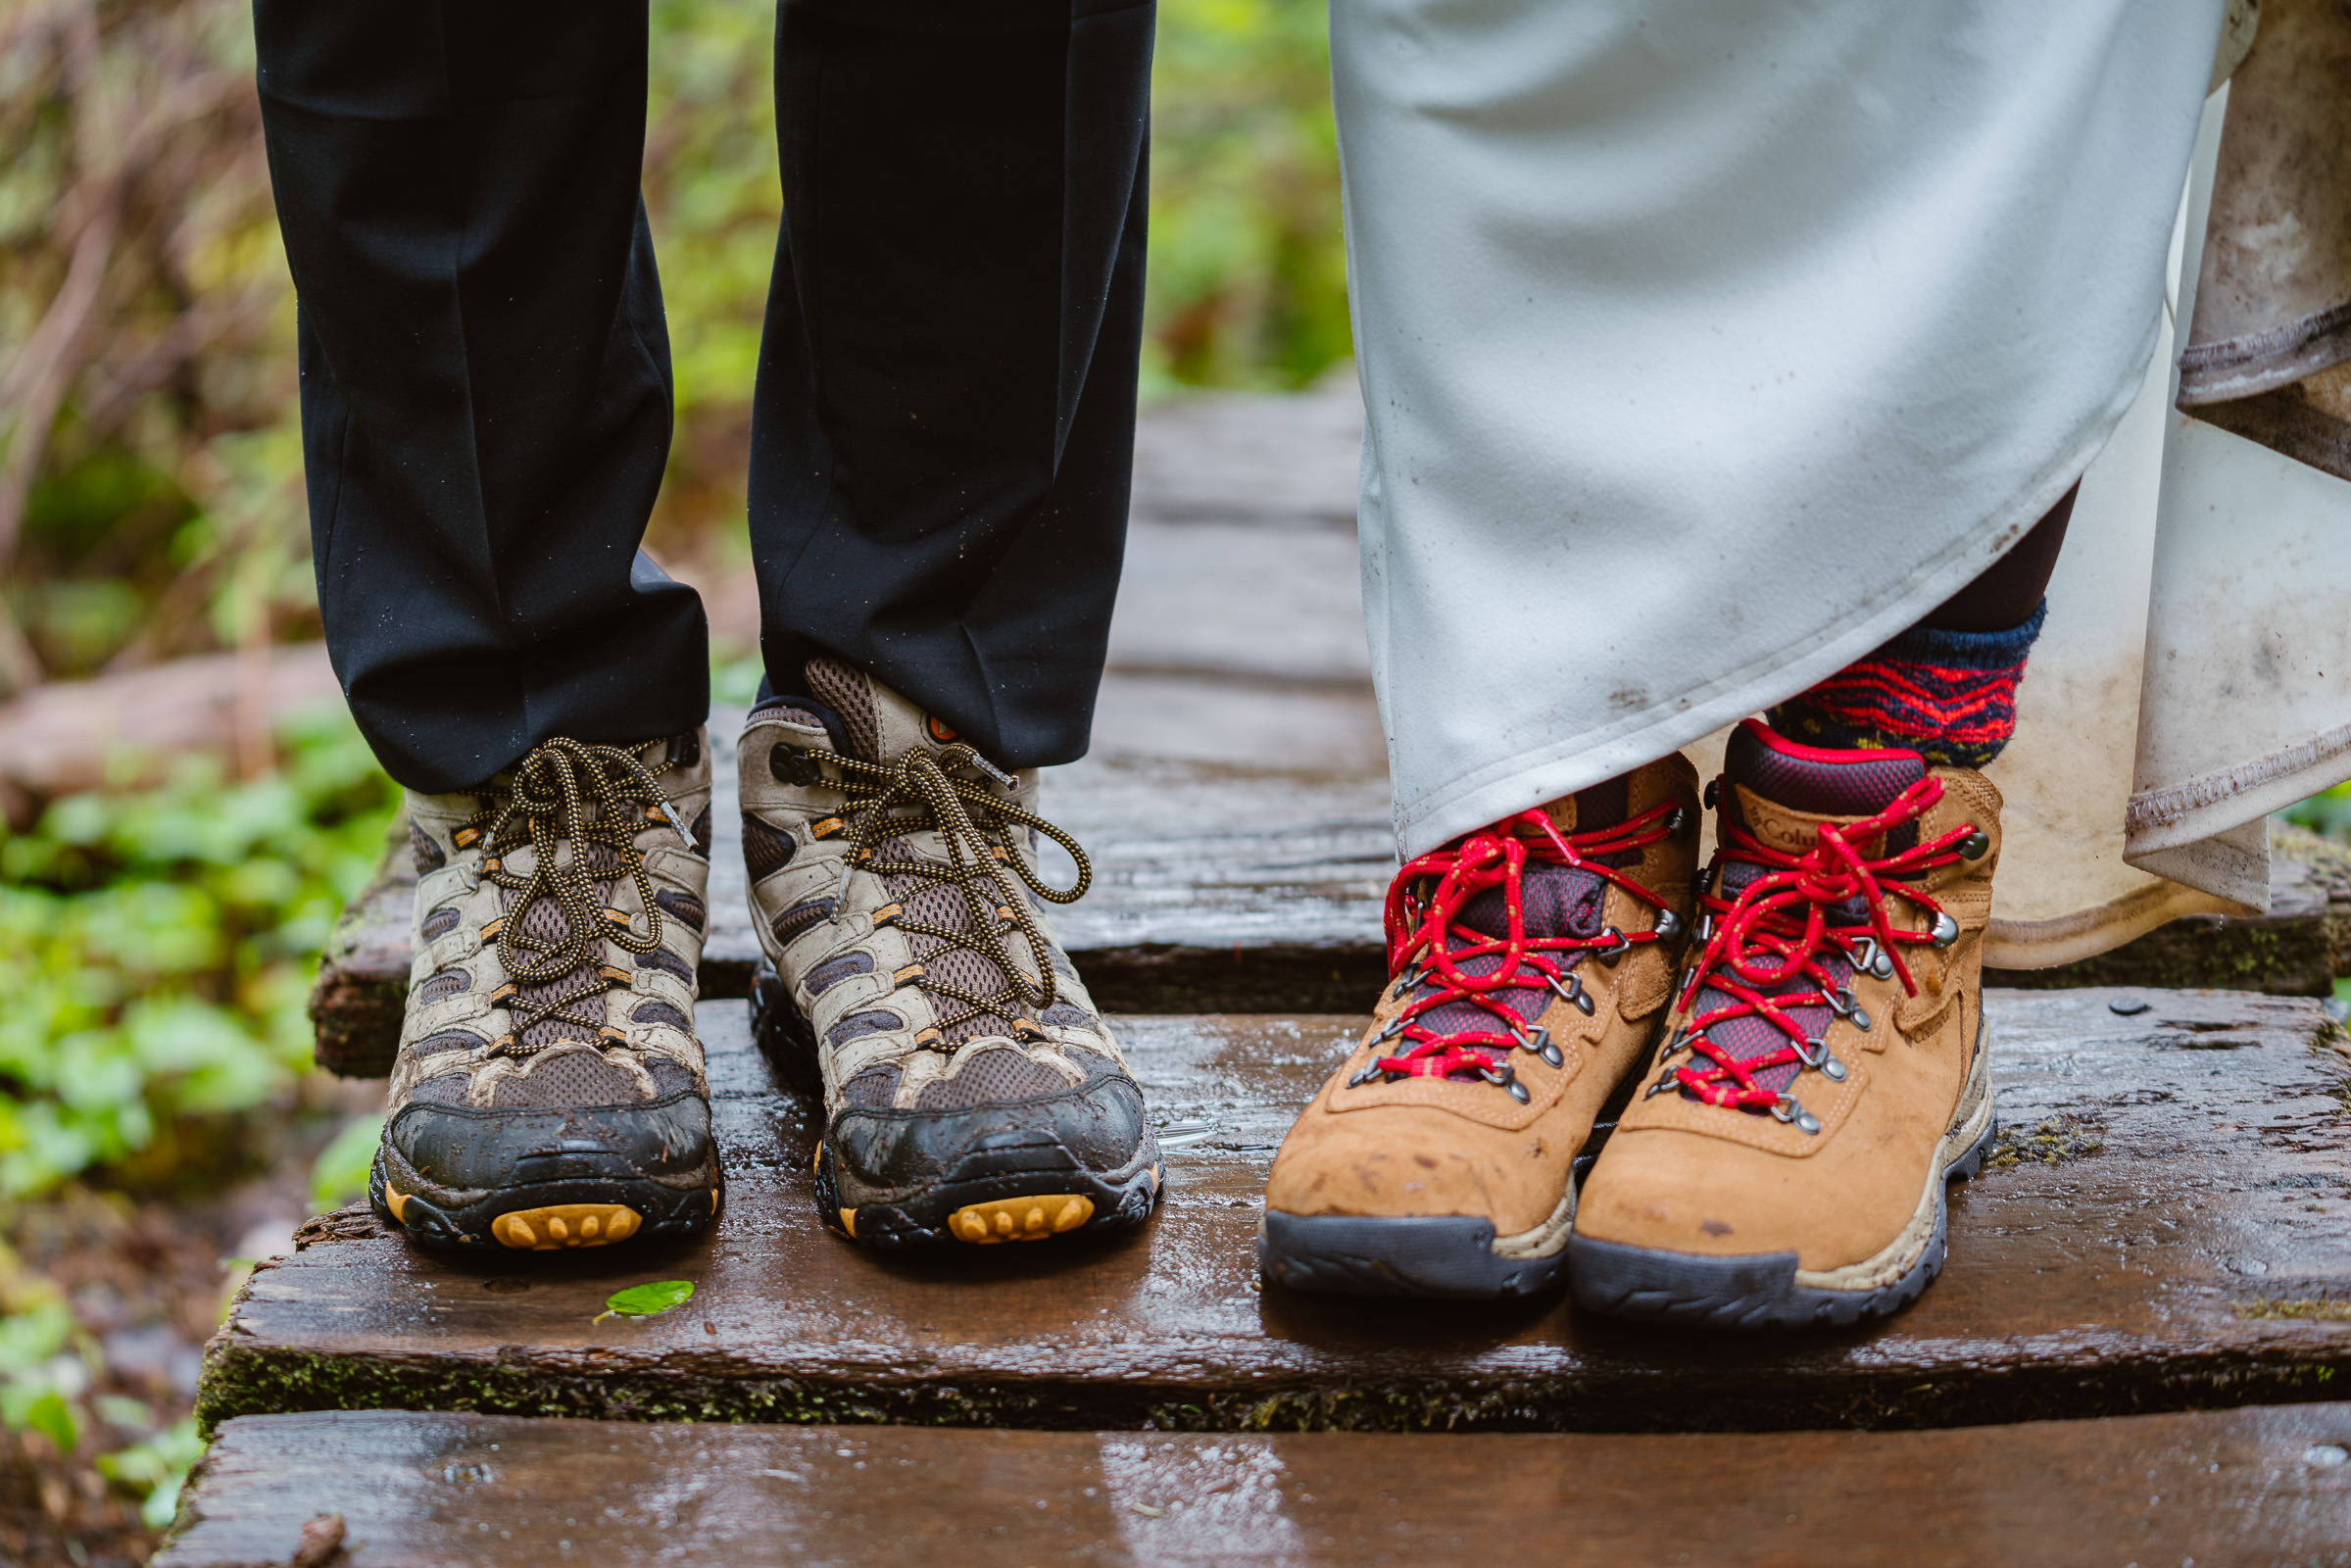 Getting Physically Fit For Your Elopement